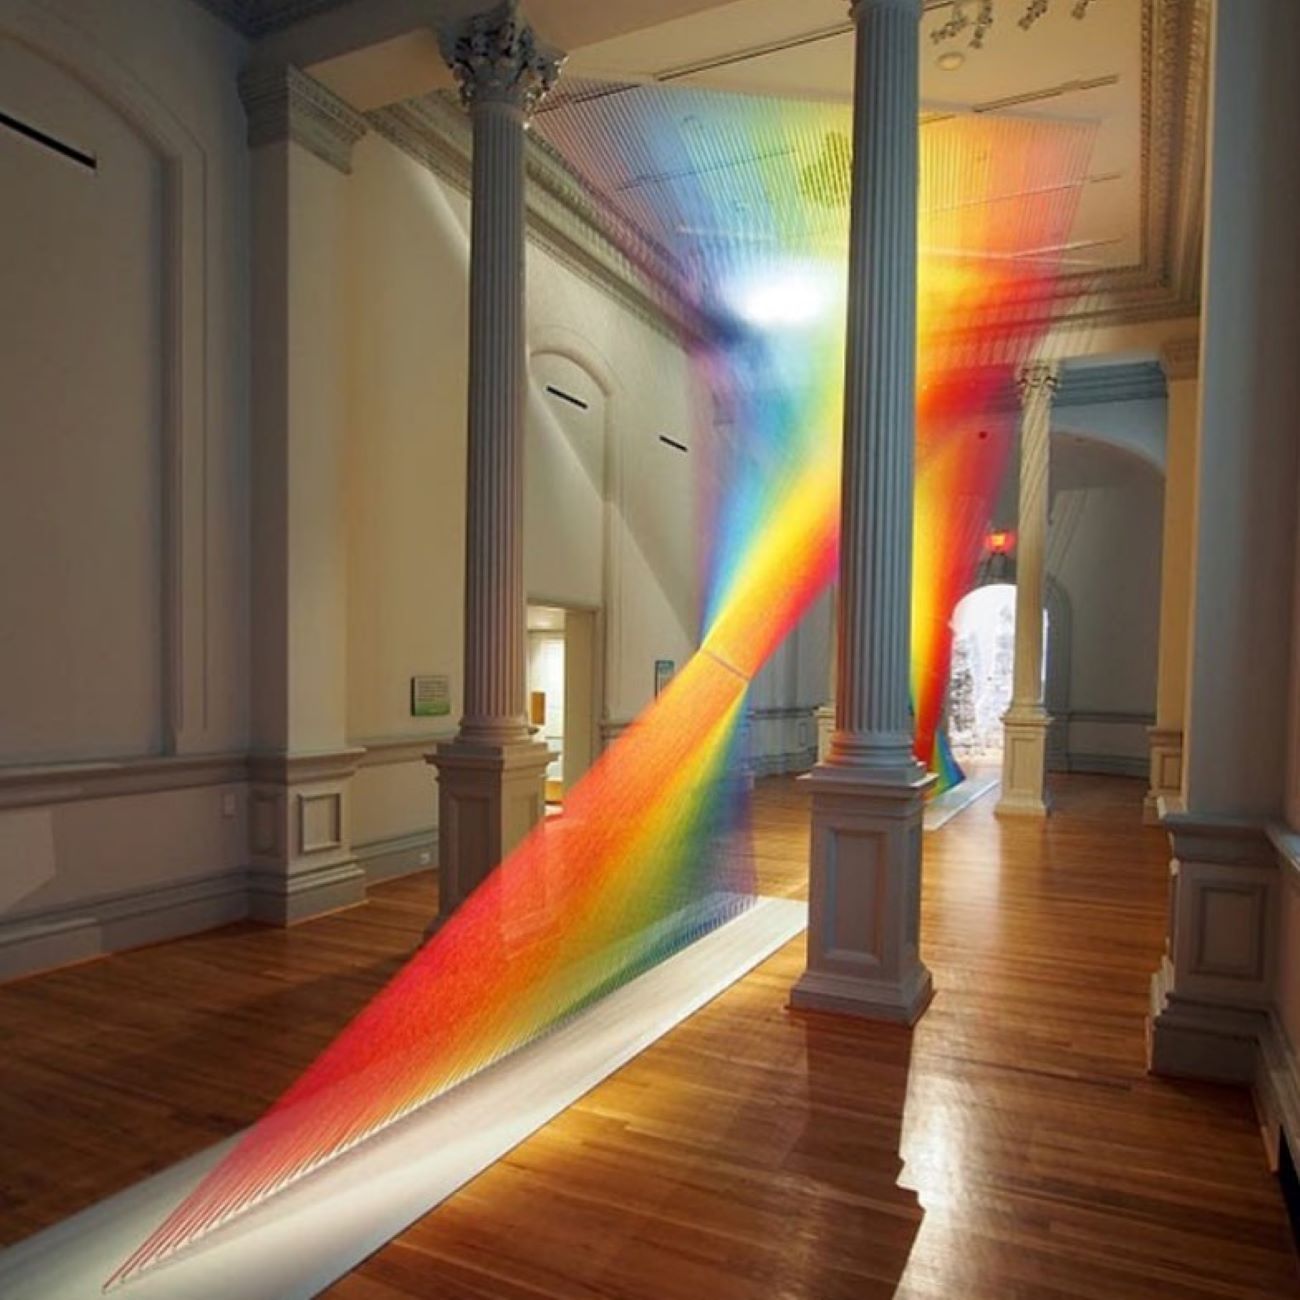 The Renwick Gallery, showcasing its historic architecture with grand columns and a rainbow art exhibit.